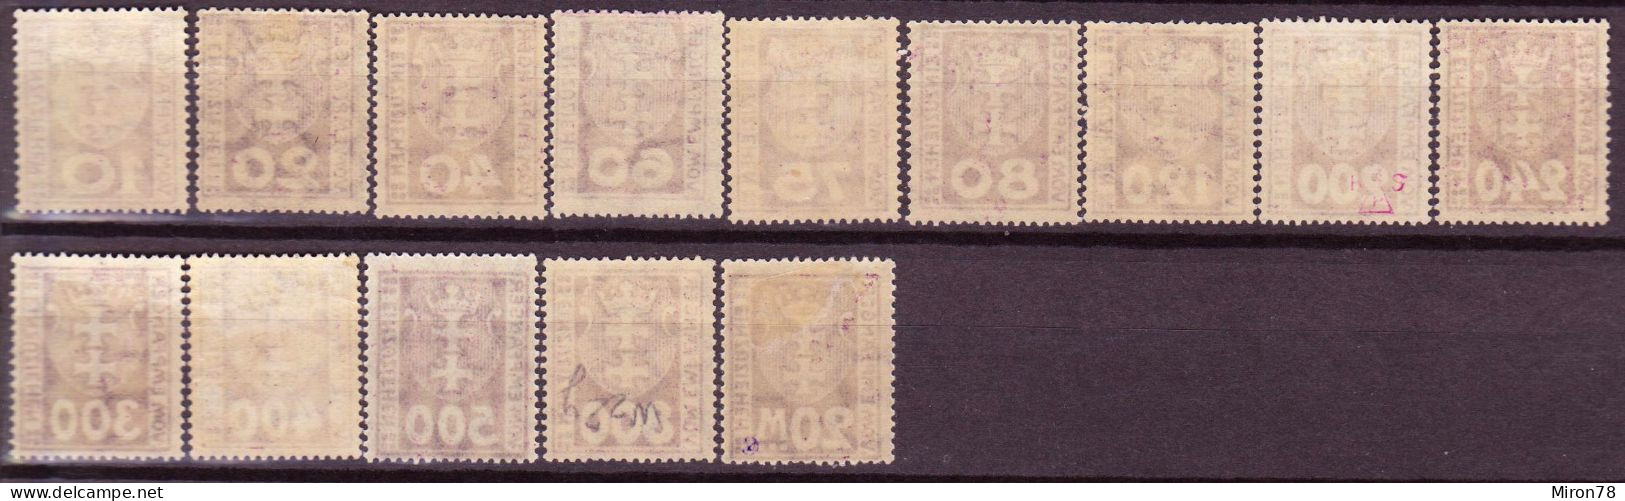 Stamps Danzig 1923 POSTAGE DUE STAMPS Mint MNH Lot6 - Postage Due